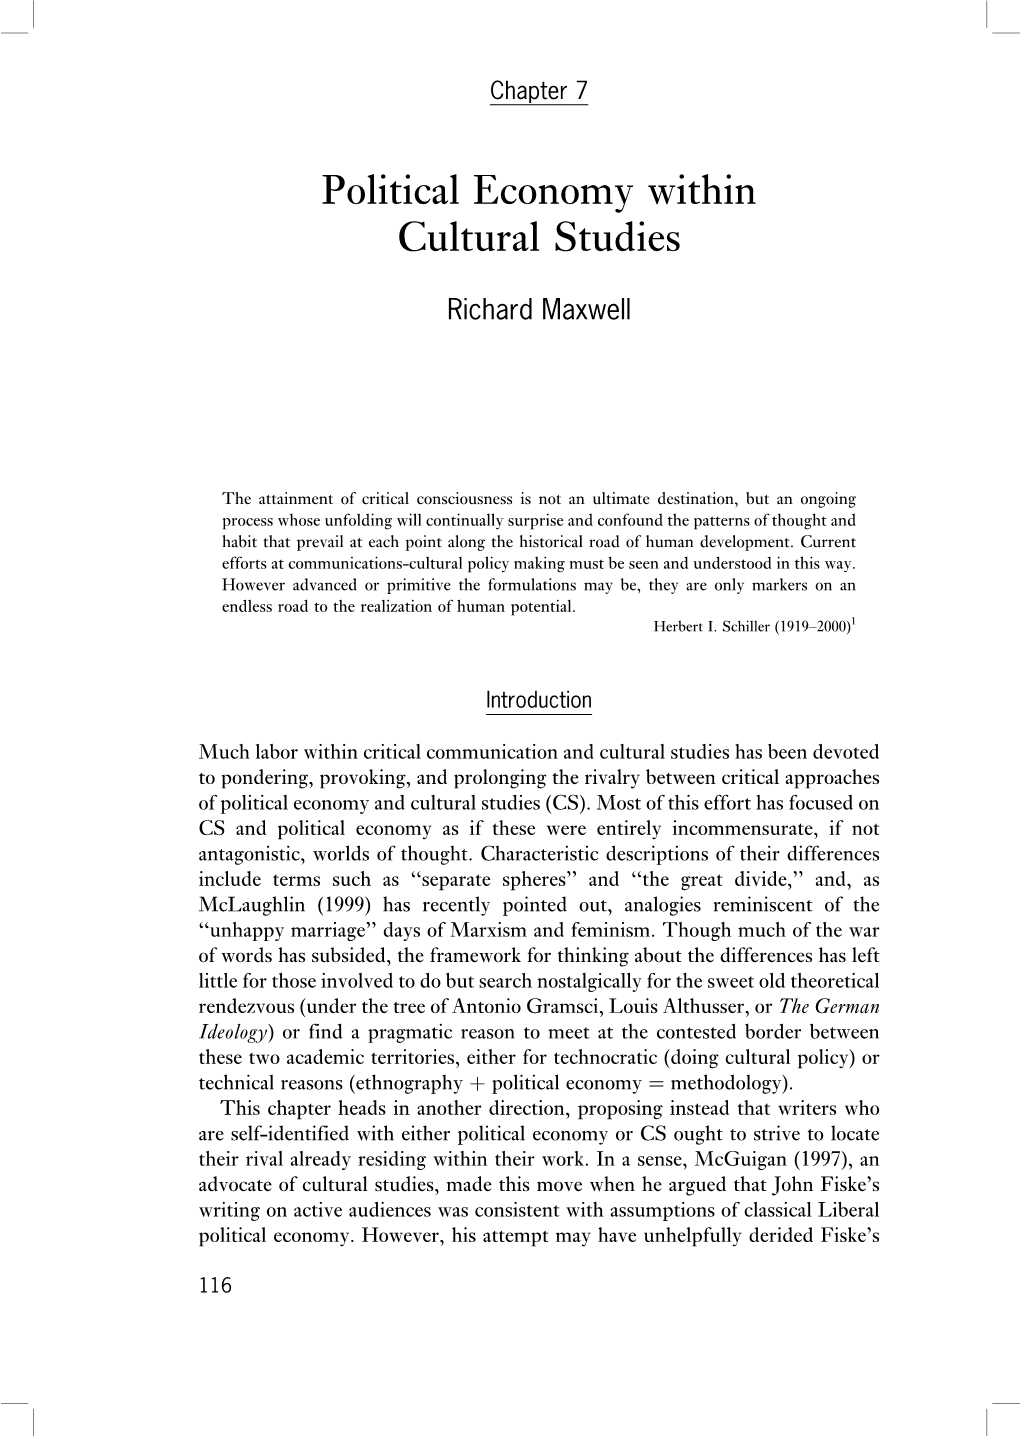 Political Economy Within Cultural Studies